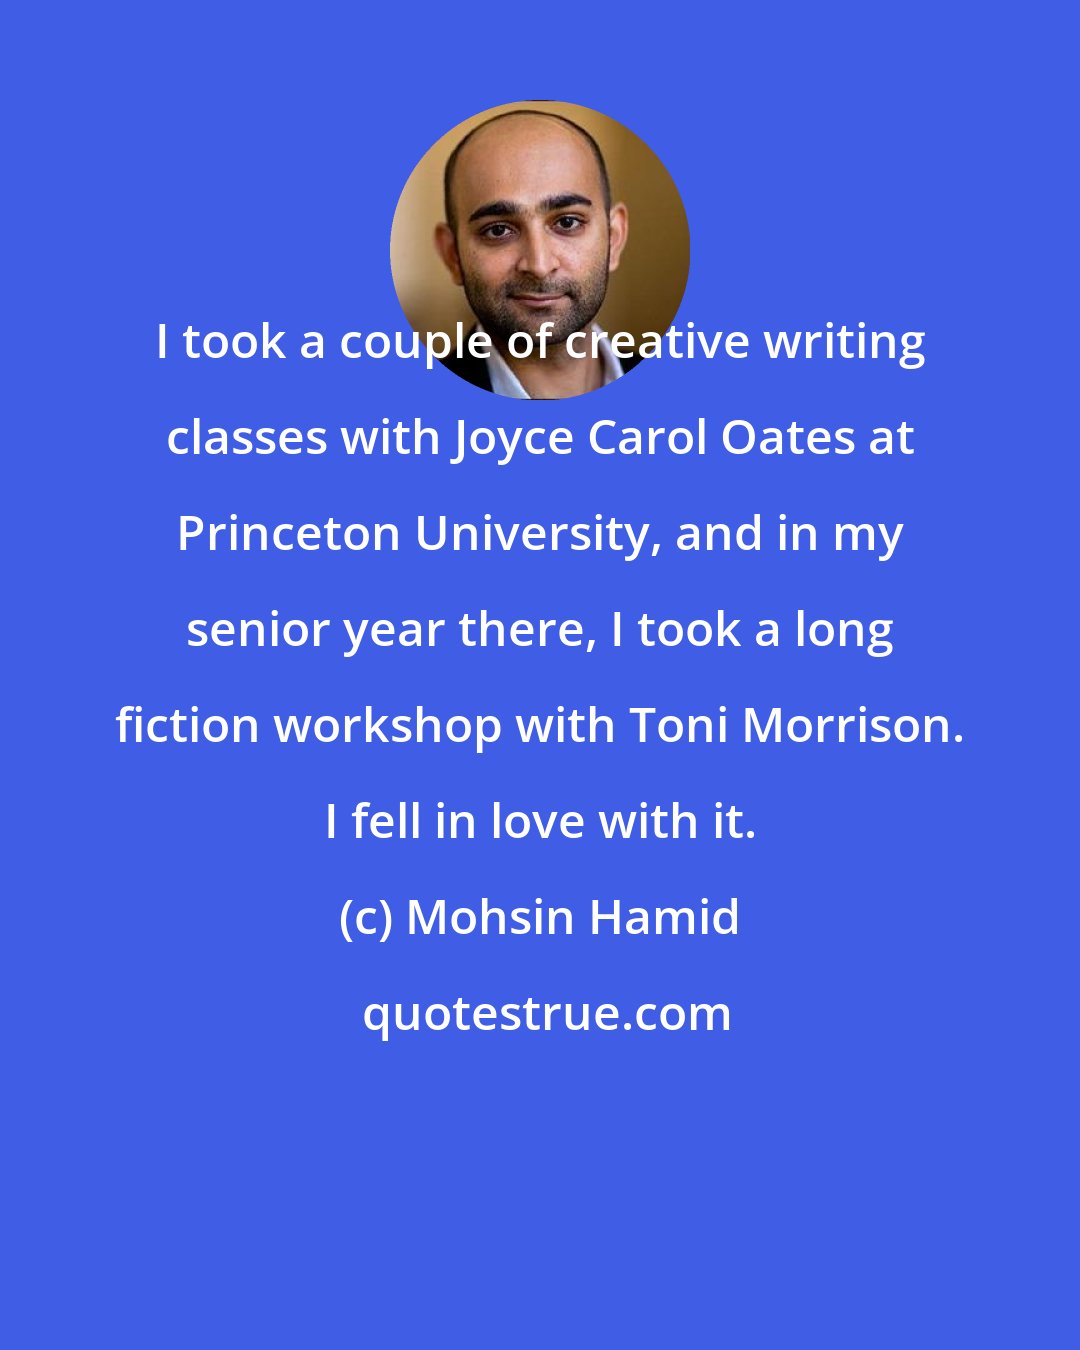 Mohsin Hamid: I took a couple of creative writing classes with Joyce Carol Oates at Princeton University, and in my senior year there, I took a long fiction workshop with Toni Morrison. I fell in love with it.